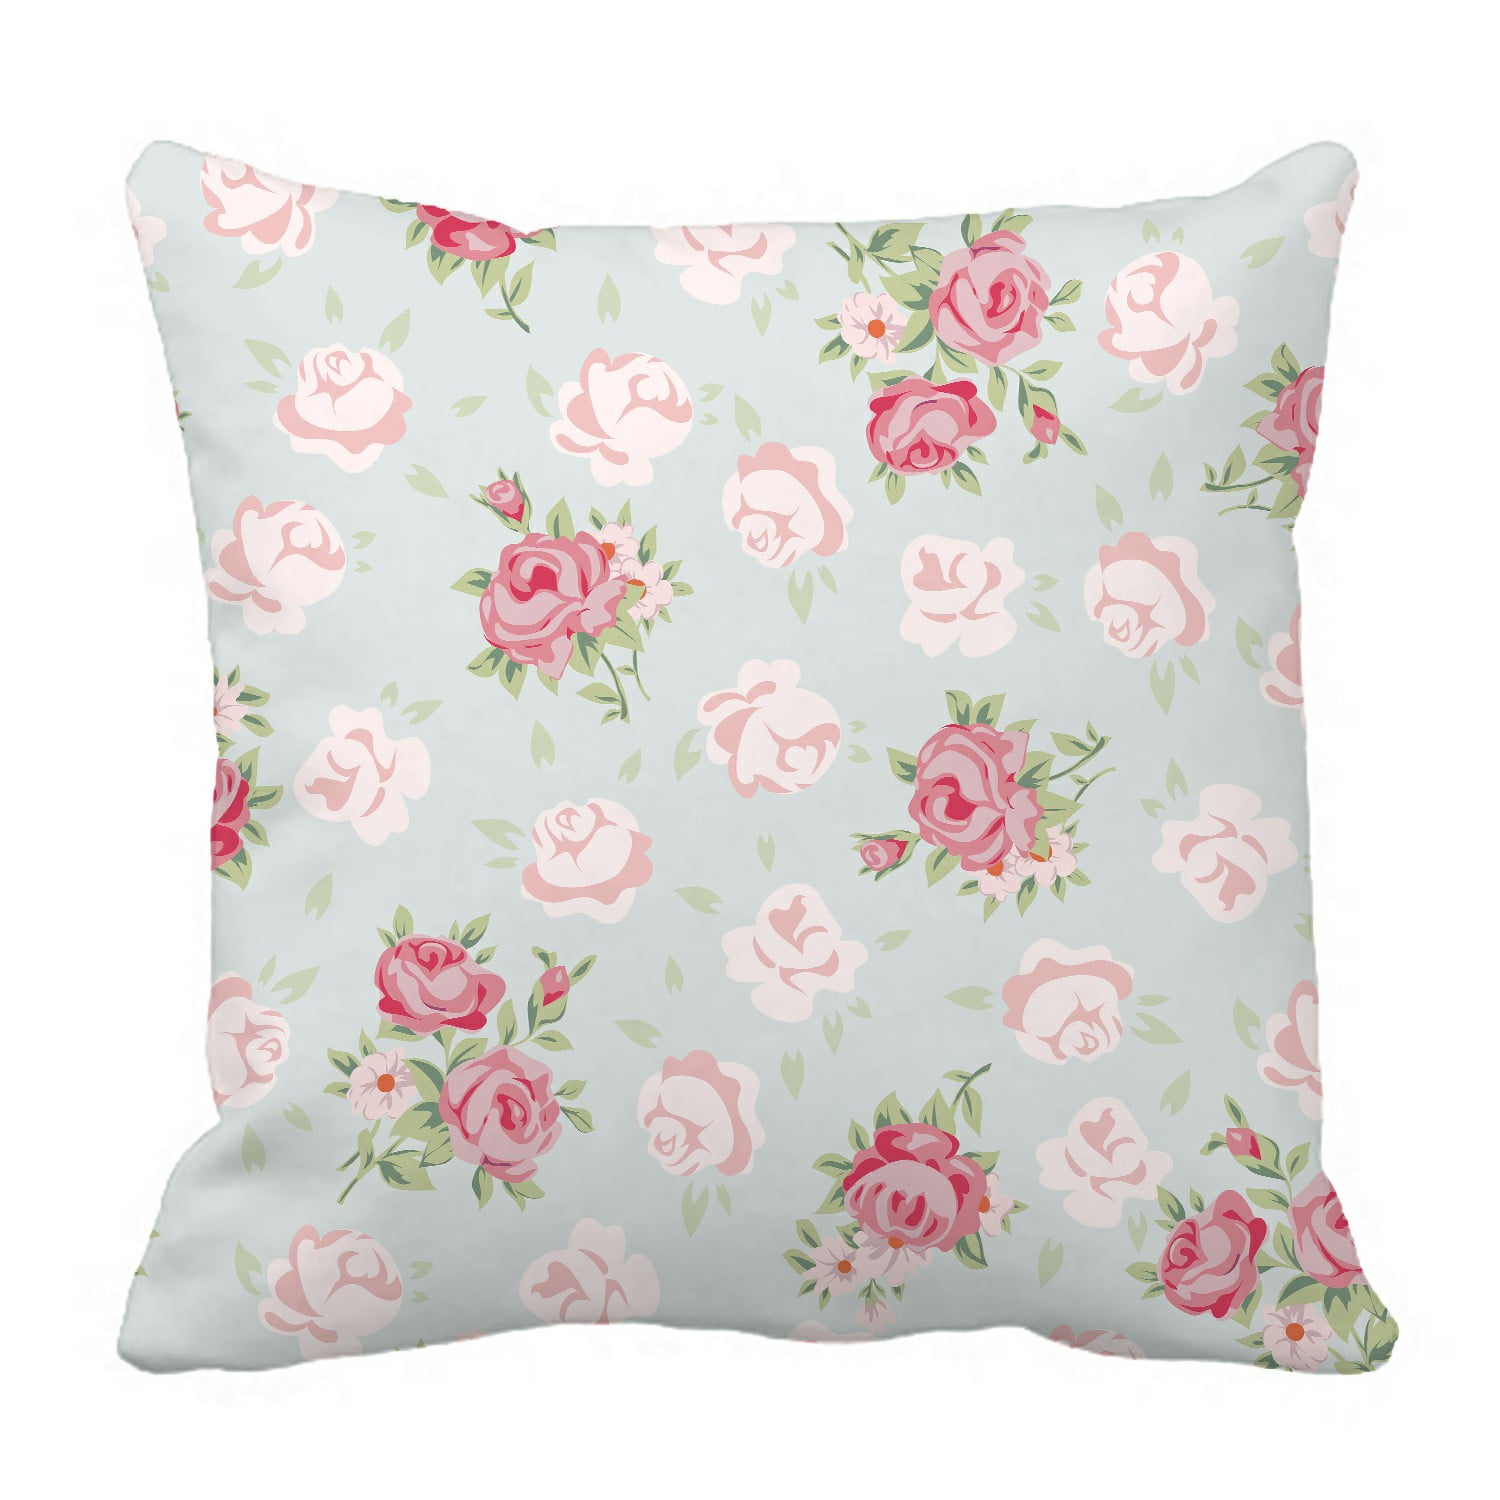 16" Cream & Pink Vintage Floral Cushion Cover Shabby Chic,Country Cottage 